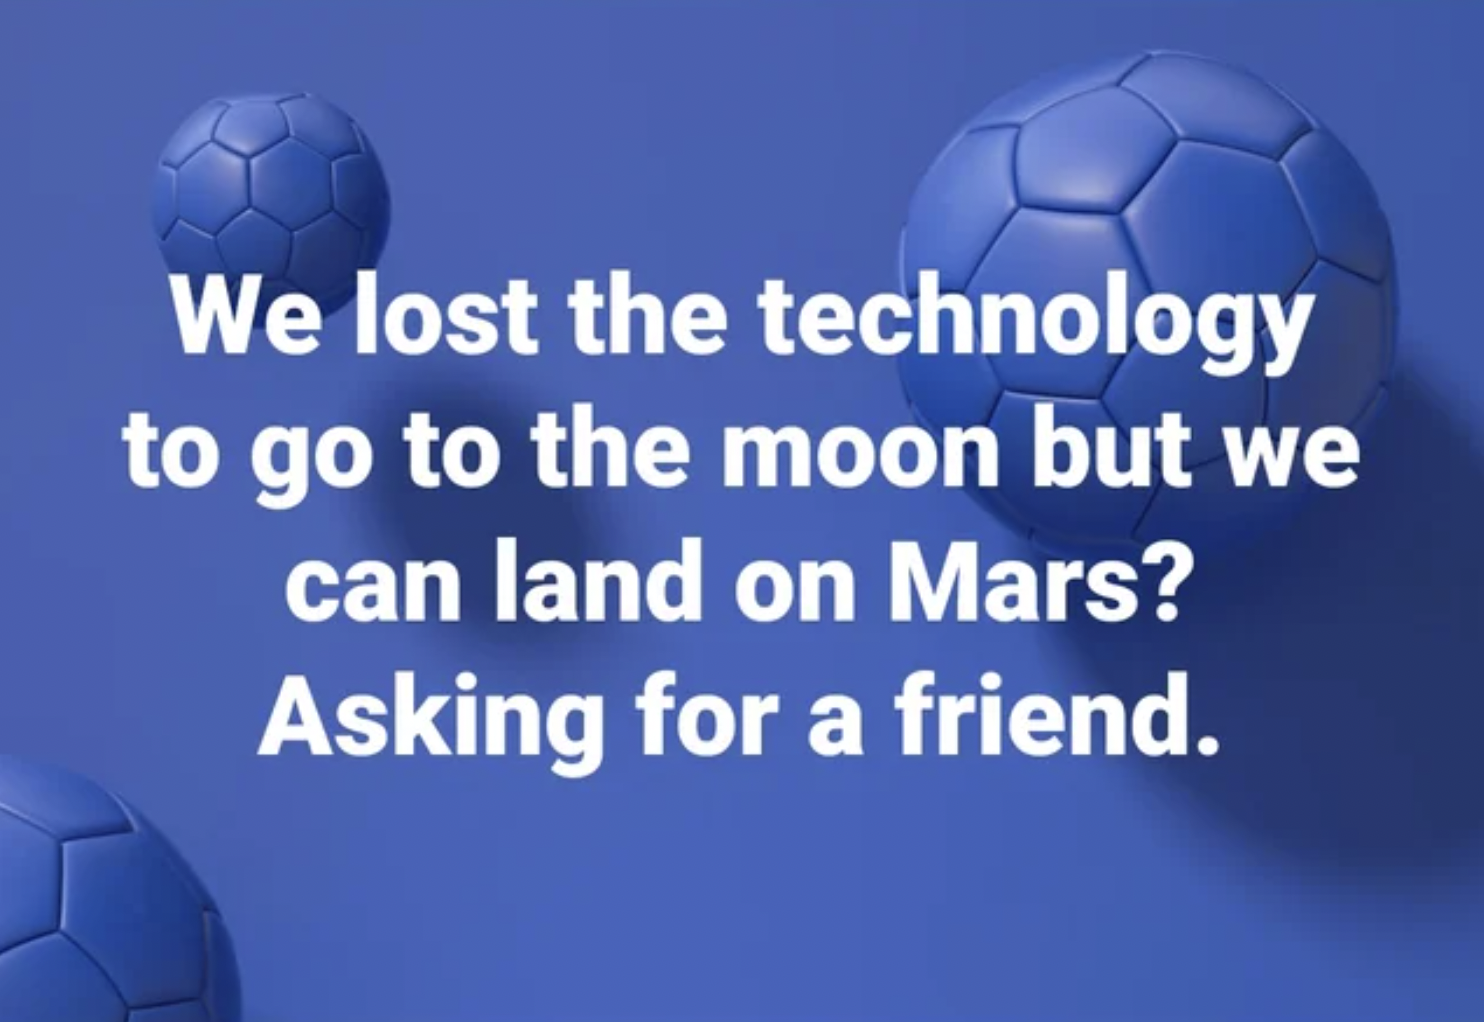 Foolish Facepalms - technology review - We lost the technology to go to the moon but we can land on Mars? Asking for a friend.